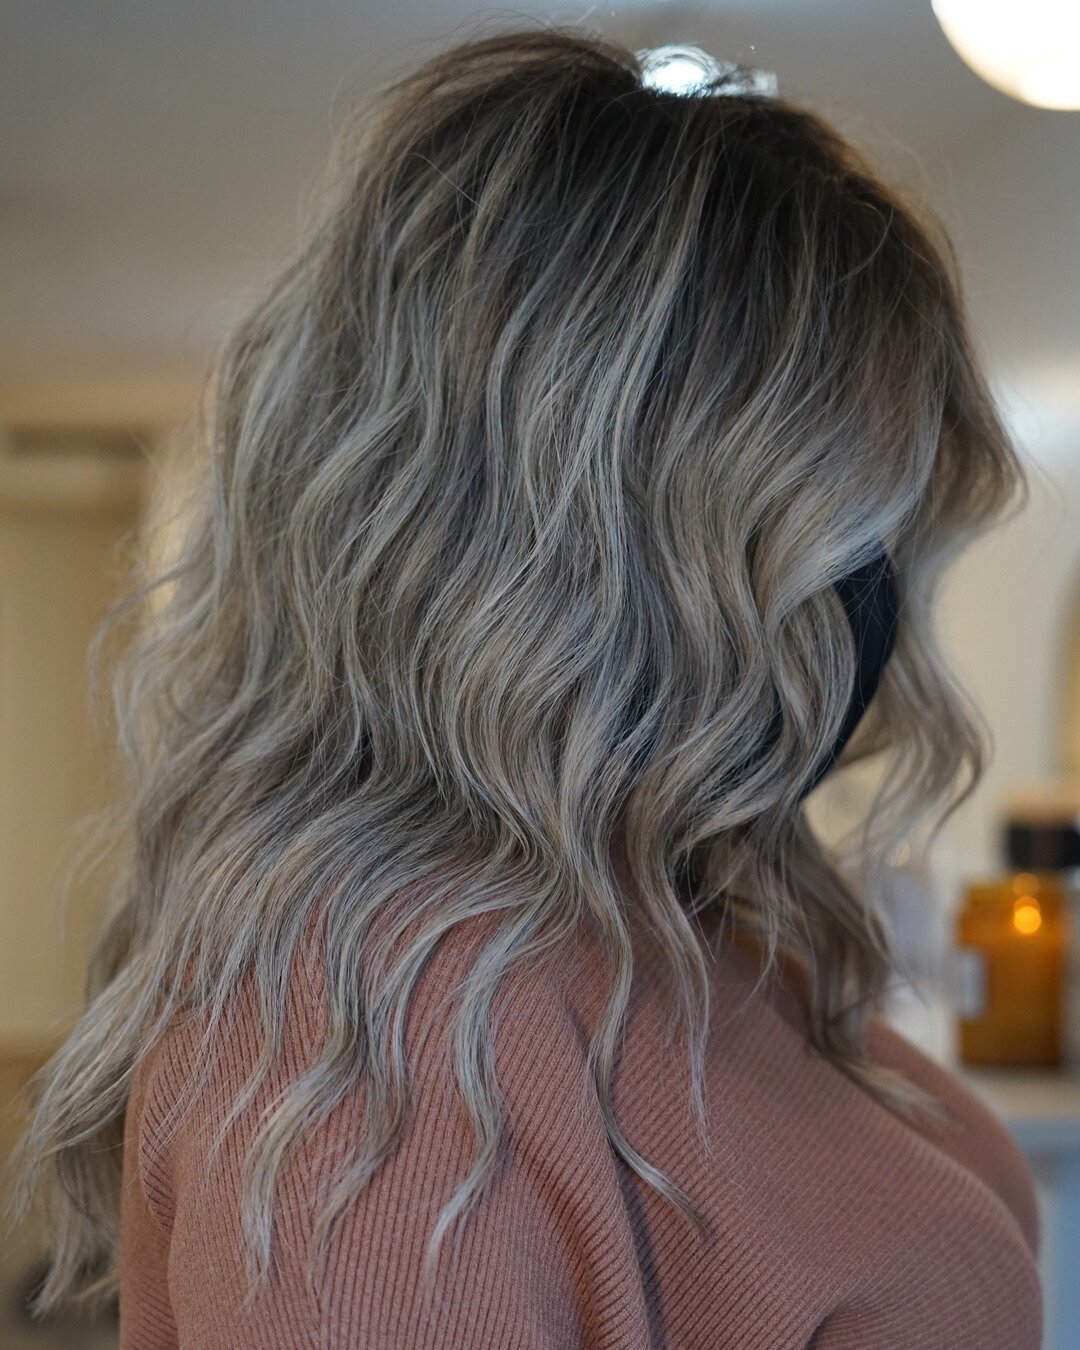 That blend tho 💋⠀⠀⠀⠀⠀⠀⠀⠀⠀
⠀⠀⠀⠀⠀⠀⠀⠀⠀
Grey blending using a full head of baby lights.⠀⠀⠀⠀⠀⠀⠀⠀⠀
⠀⠀⠀⠀⠀⠀⠀⠀⠀
Hair by @leahforprez⠀⠀⠀⠀⠀⠀⠀⠀⠀
.⠀⠀⠀⠀⠀⠀⠀⠀⠀
.⠀⠀⠀⠀⠀⠀⠀⠀⠀
.⠀⠀⠀⠀⠀⠀⠀⠀⠀
.⠀⠀⠀⠀⠀⠀⠀⠀⠀
.⠀⠀⠀⠀⠀⠀⠀⠀⠀
#arisahairny #chelseanyc #nyhair #nychair #babylights  #sarah